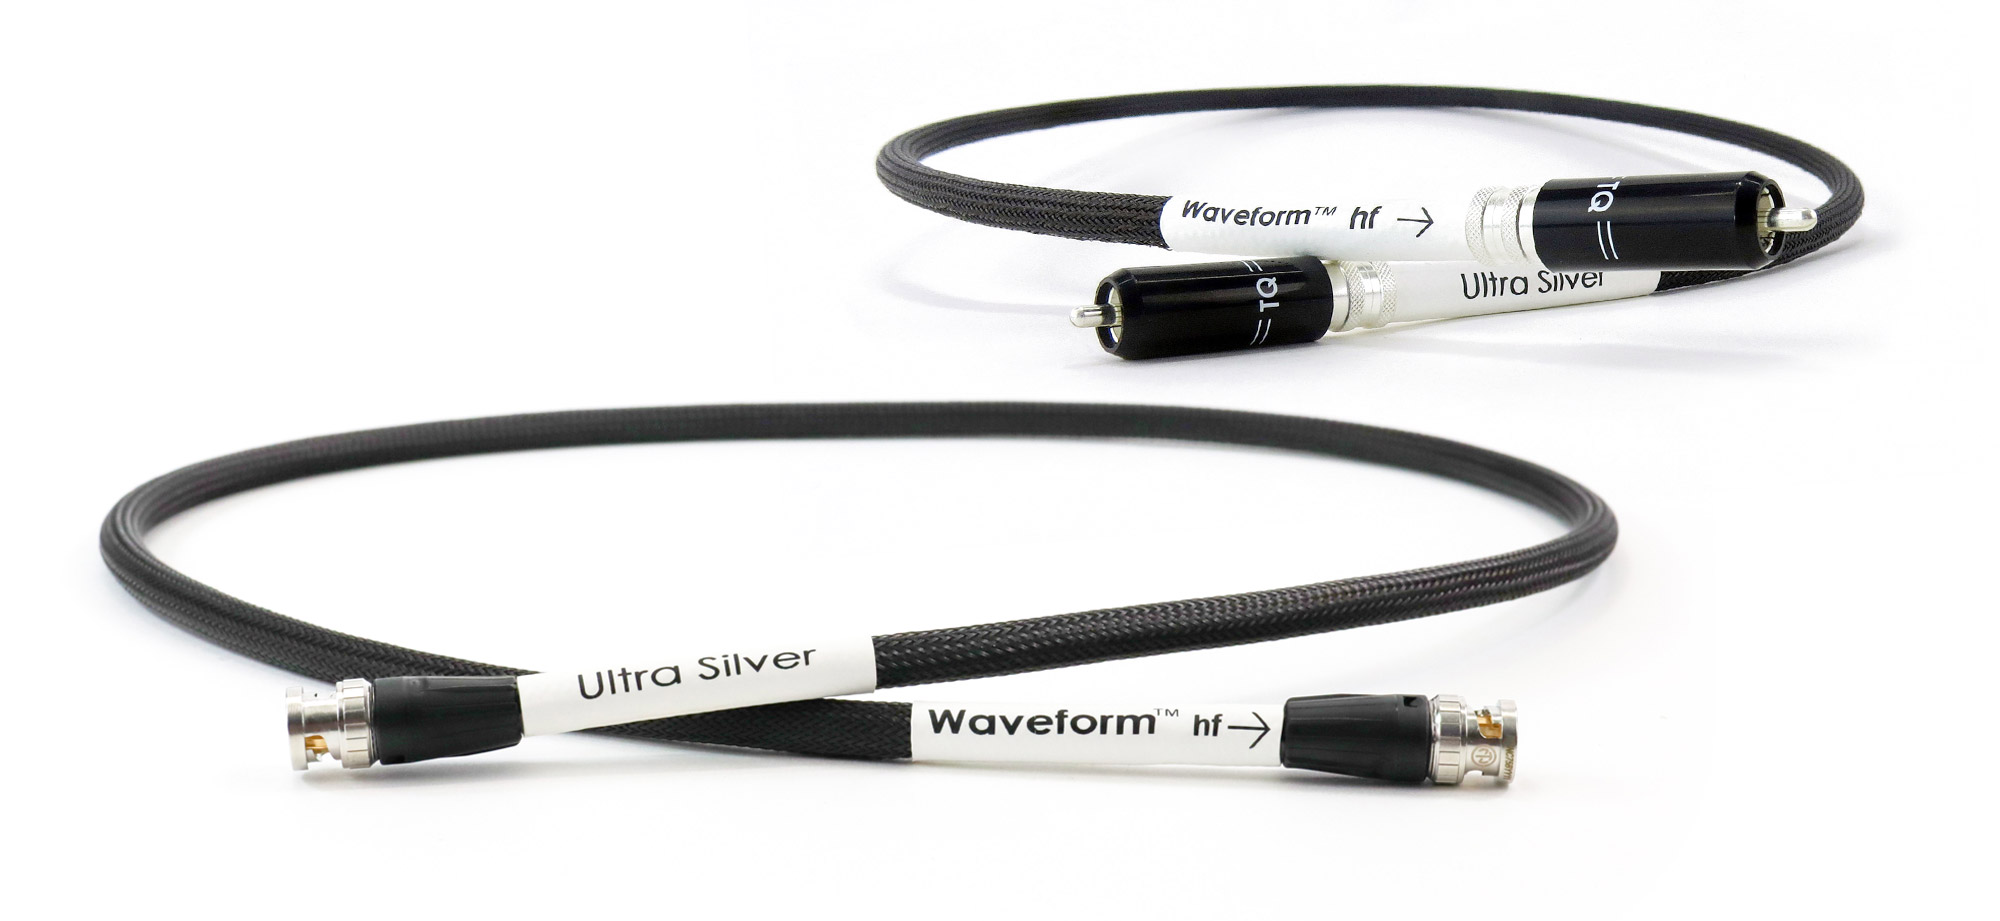 Featured image for “Ultra Silver Digital RCA”